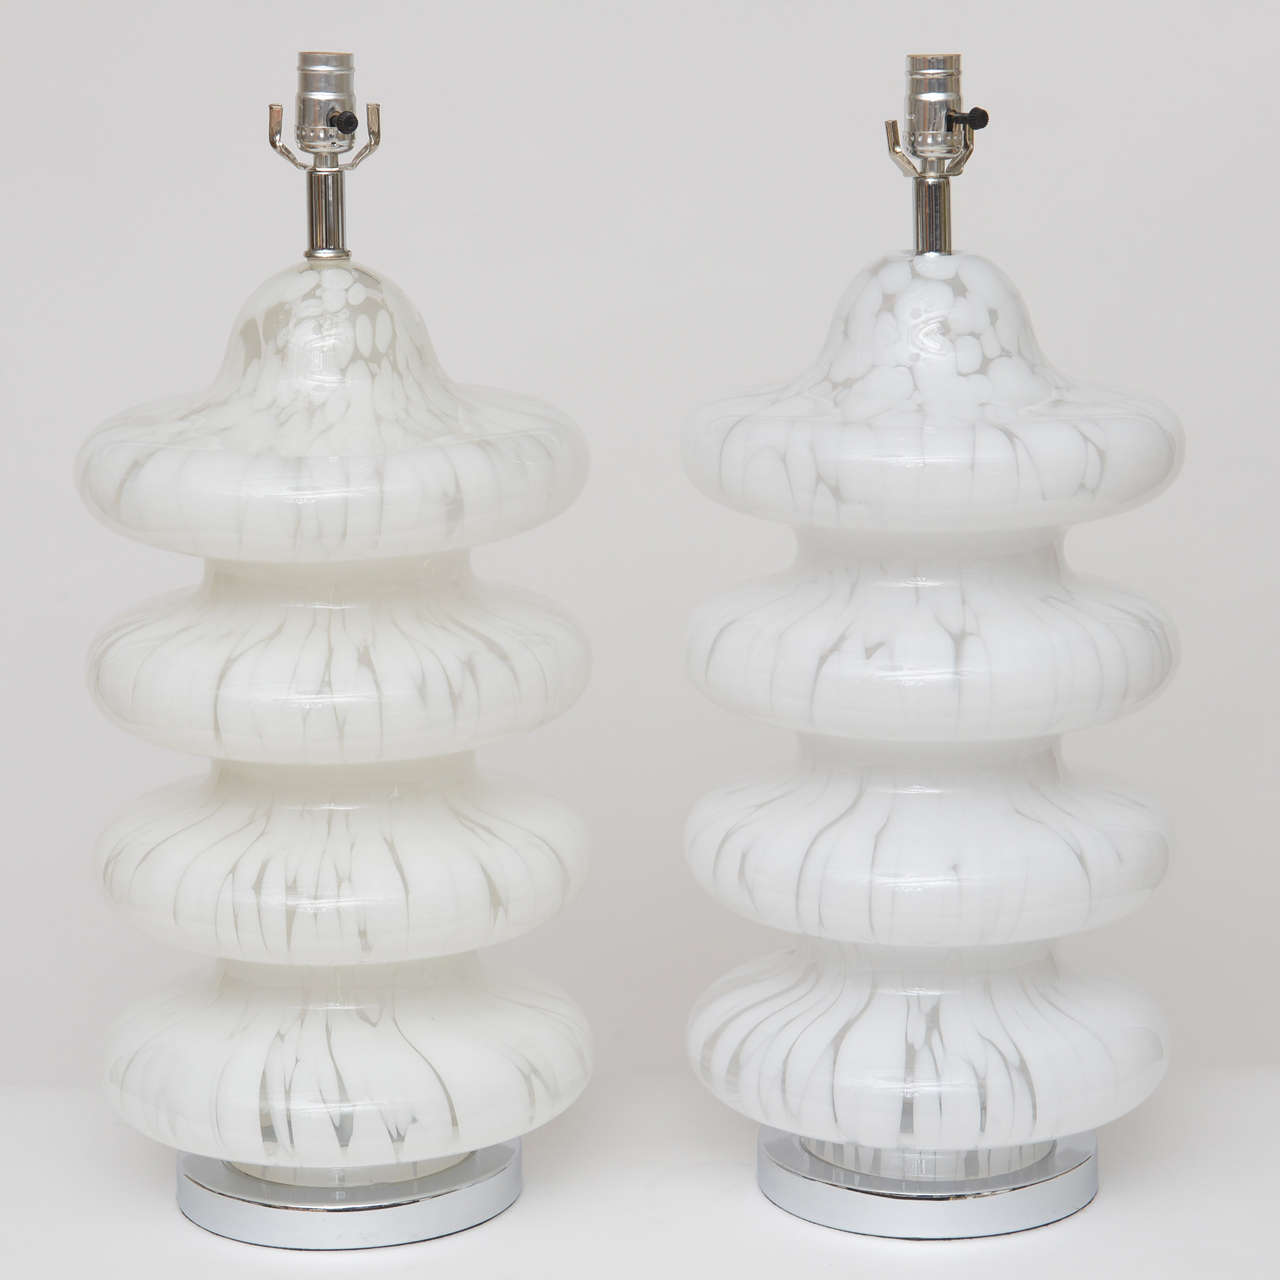 Tall, four-tiered table lamps with tortoise-effect Murano glass in clear and white. Nickel hardware, new wiring. Height measurement below is to top of socket.